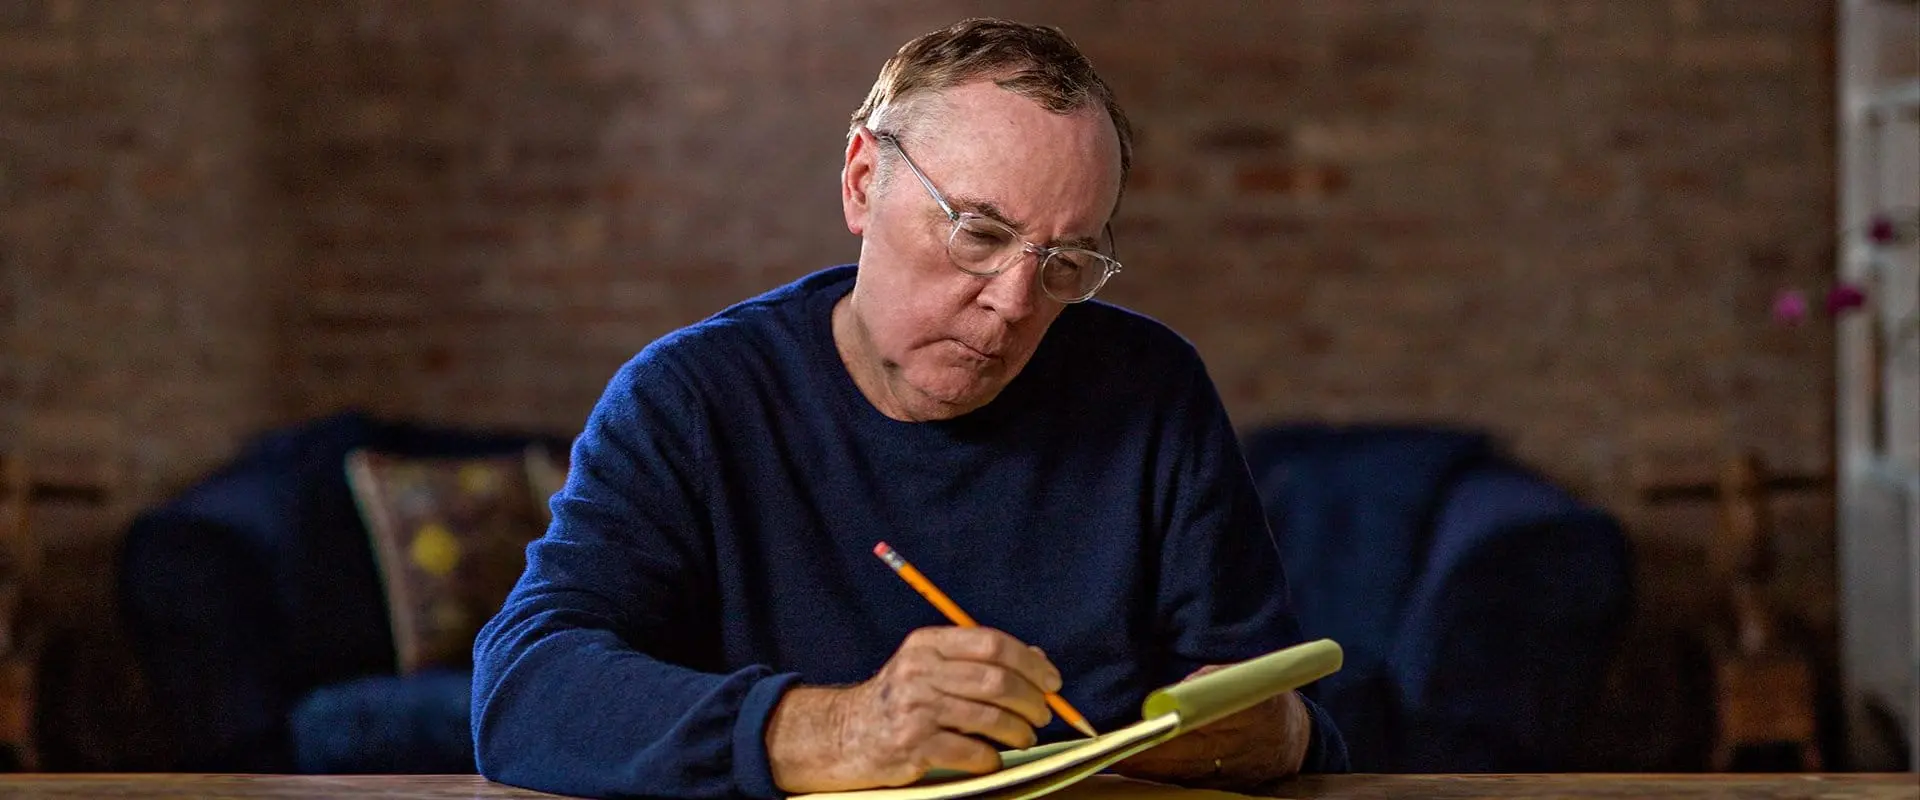 James Patterson Teaches Writing